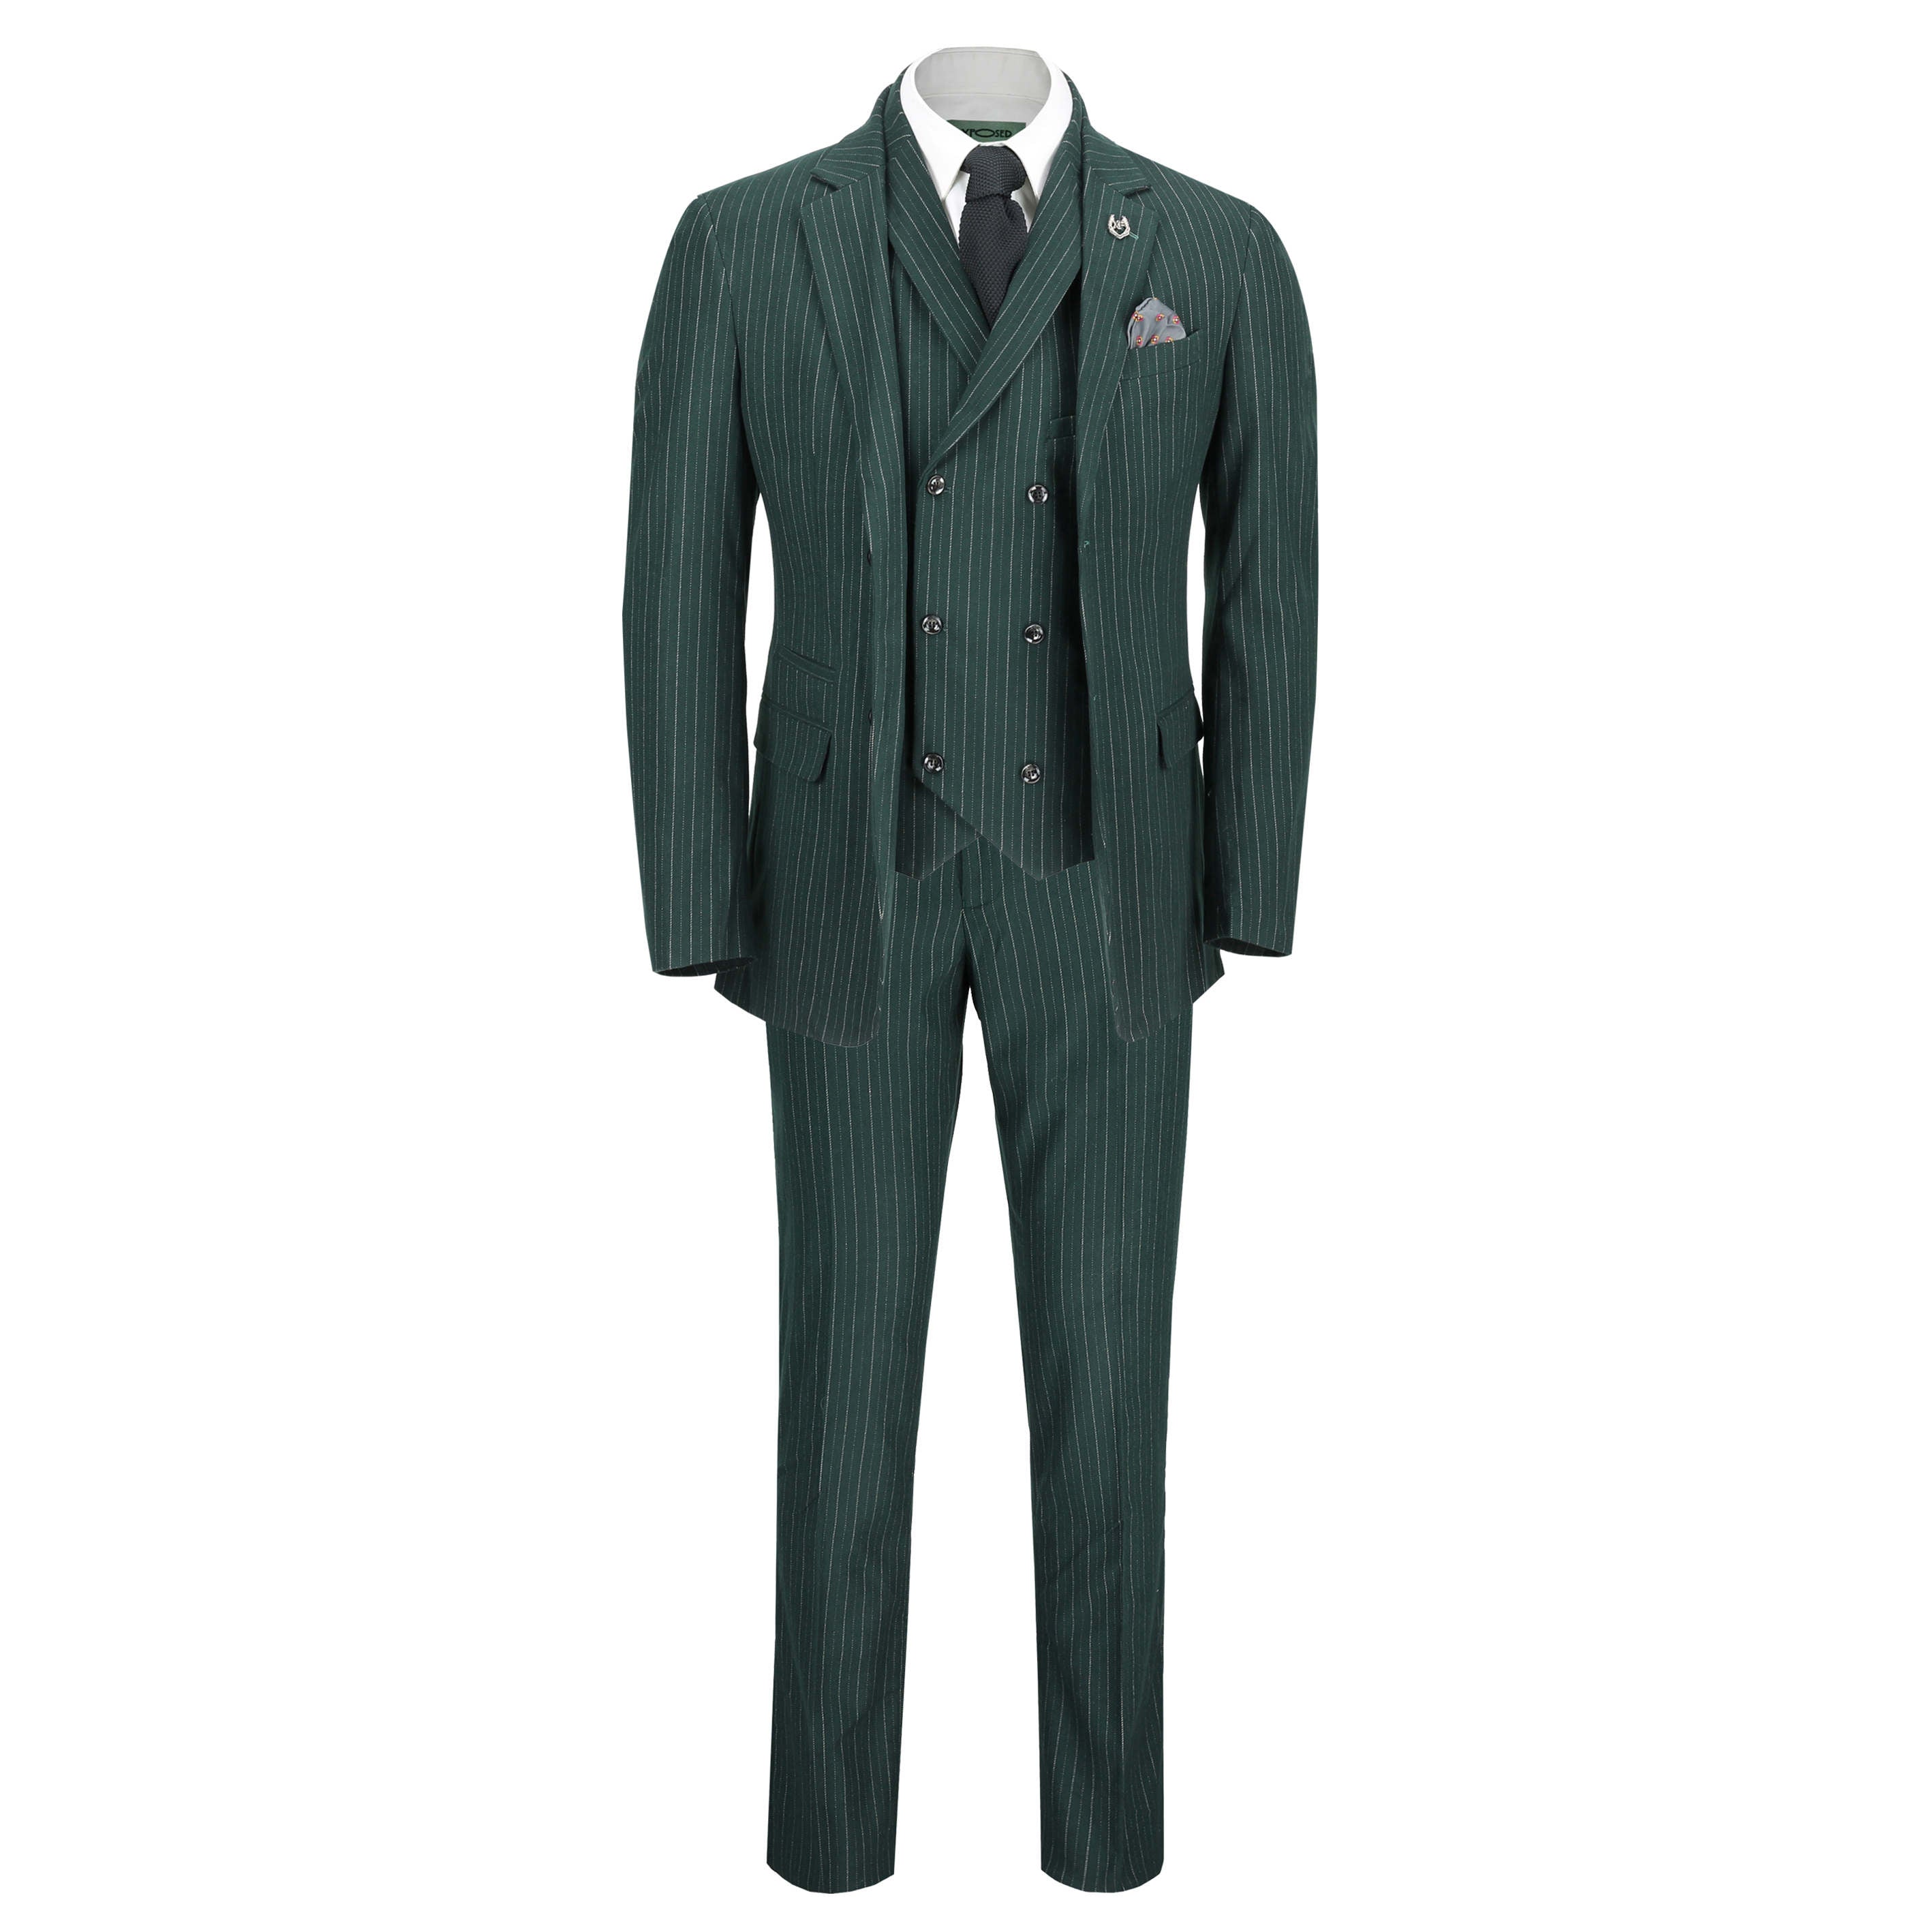 Mens 3 Piece Suit Green Pinstripe 1920S Tailored Fit Jacket Trouser Waistcoat